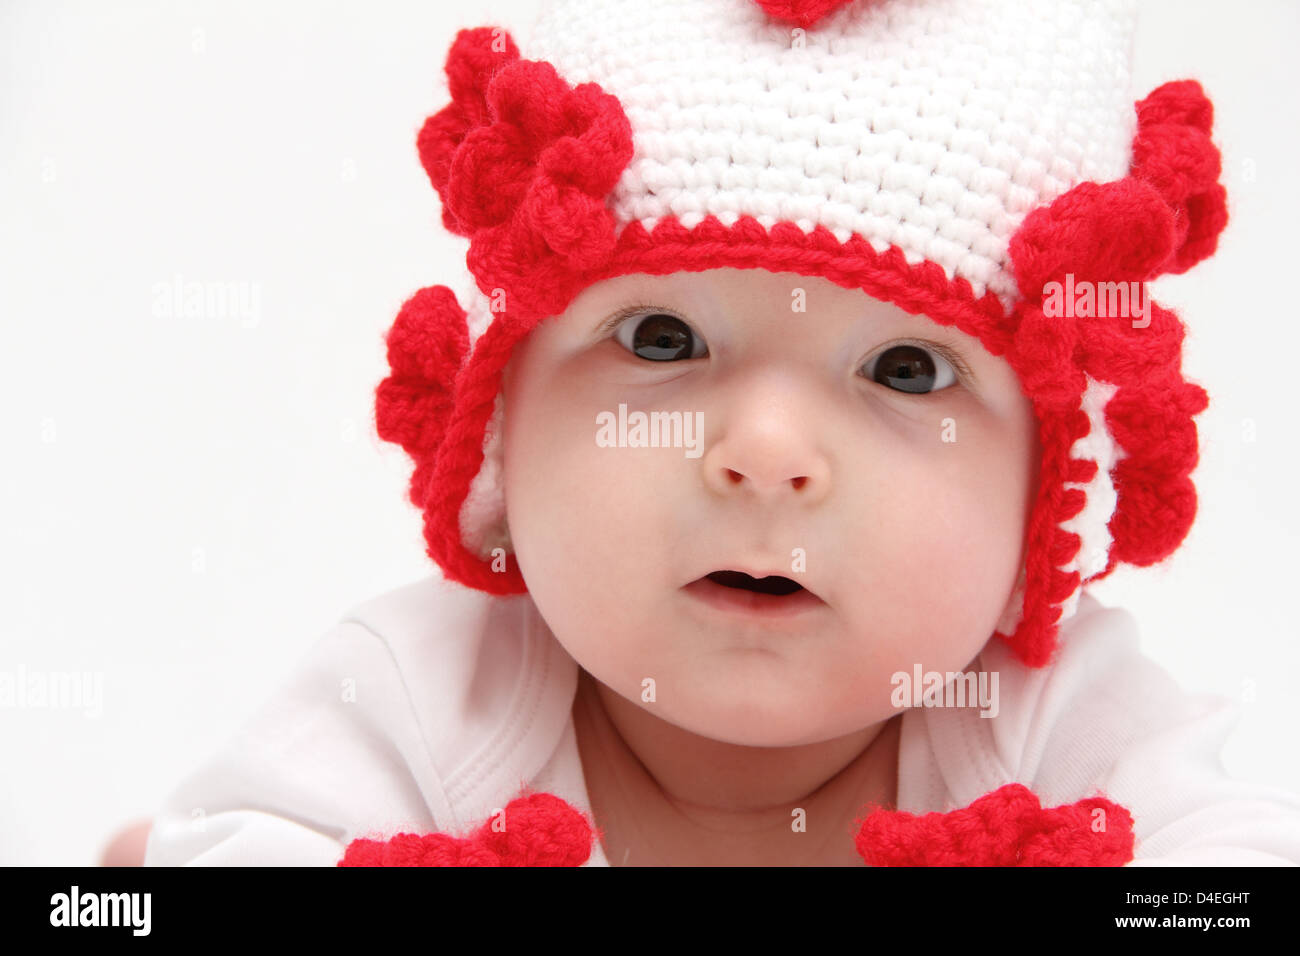 Little baby with knitted white hat with red flowers Stock Photo